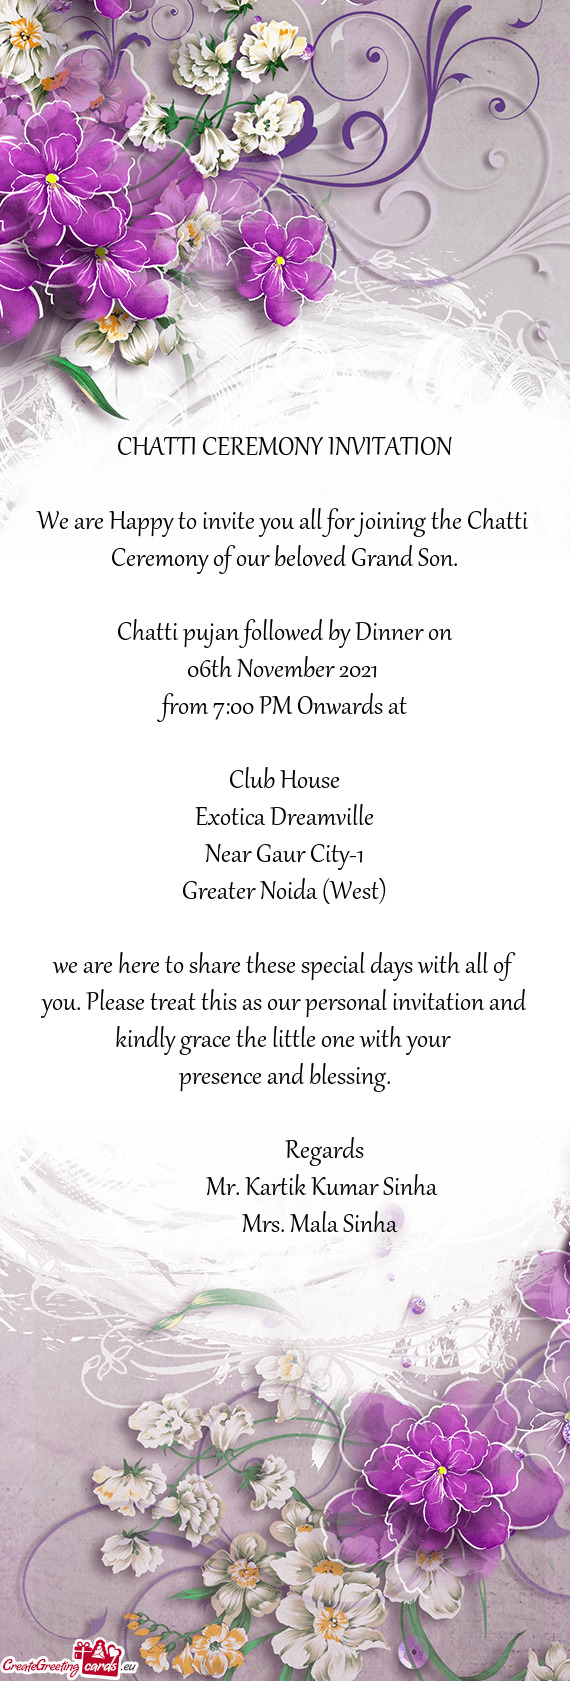 We are Happy to invite you all for joining the Chatti Ceremony of our beloved Grand Son